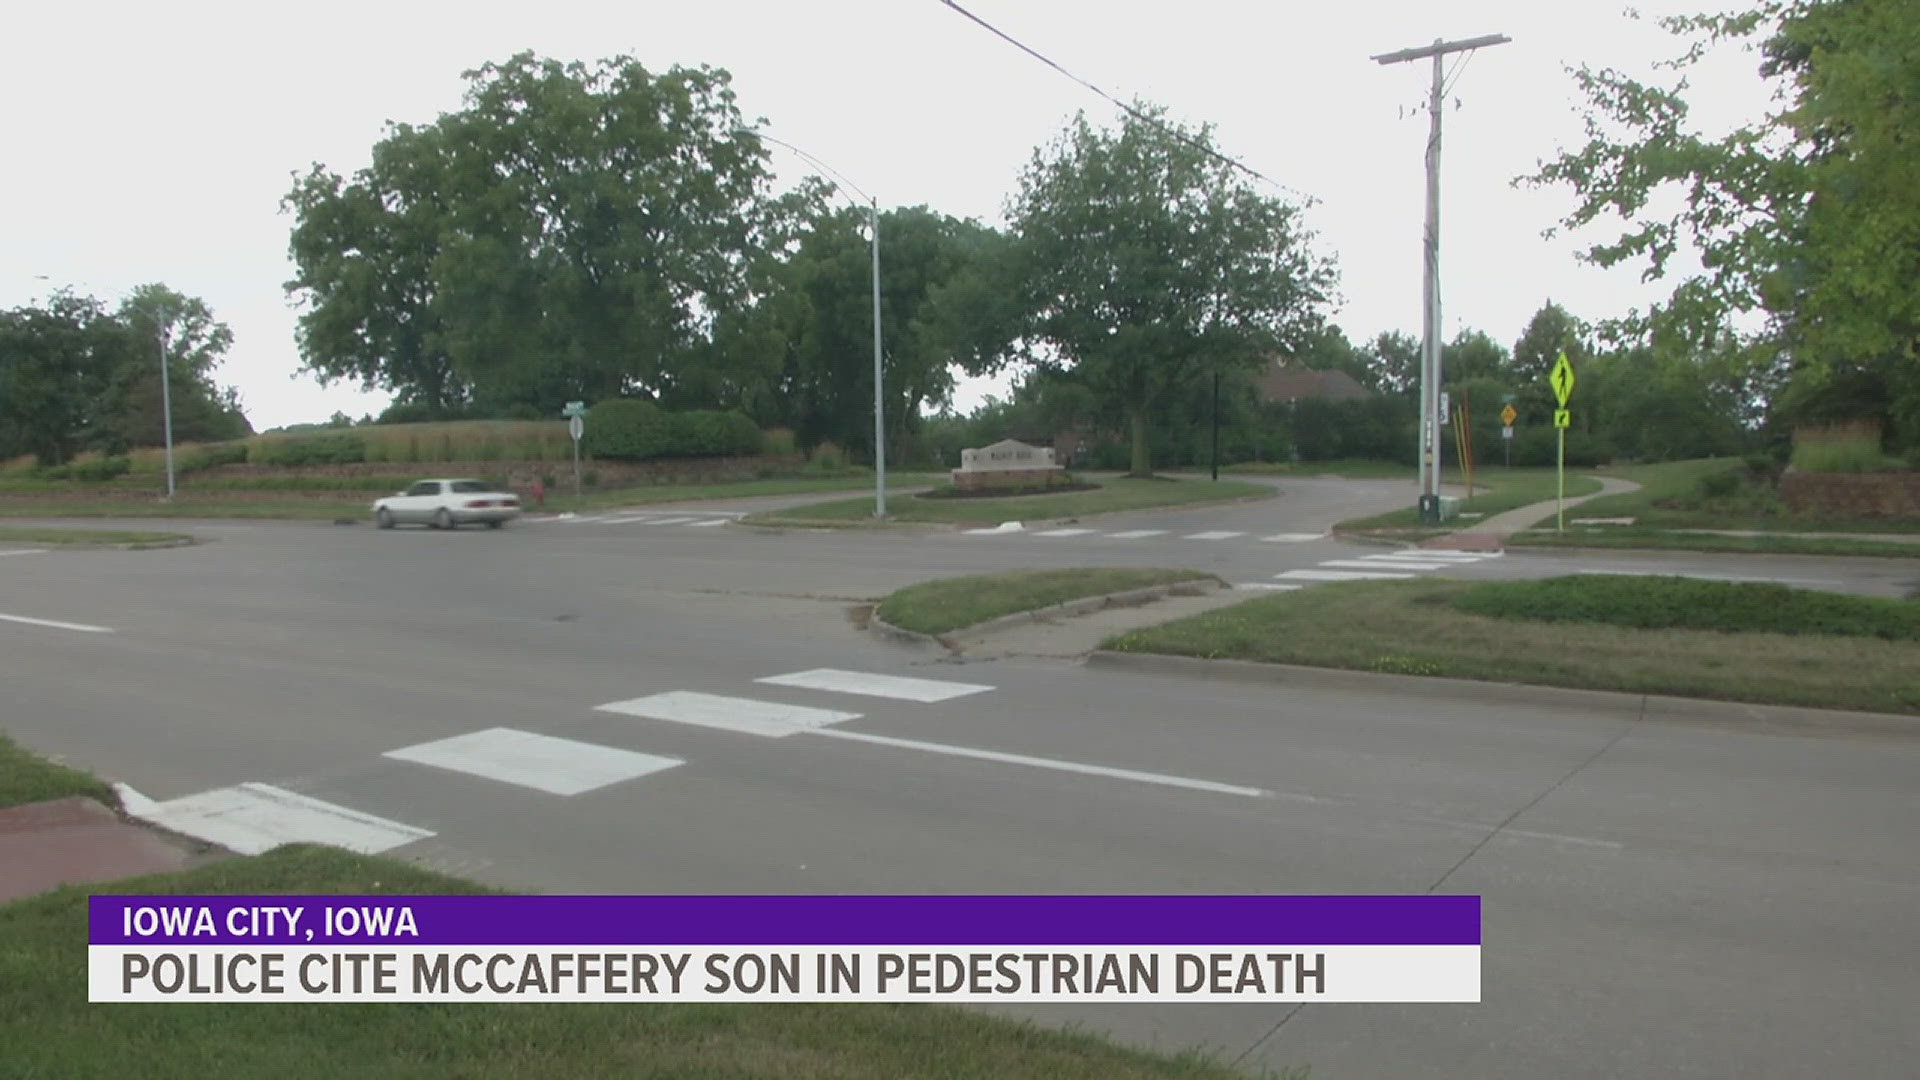 16-year-old Jonathan McCaffery failed to yield to 45-year-old Corey Hite as he was jogging. He died two weeks later.